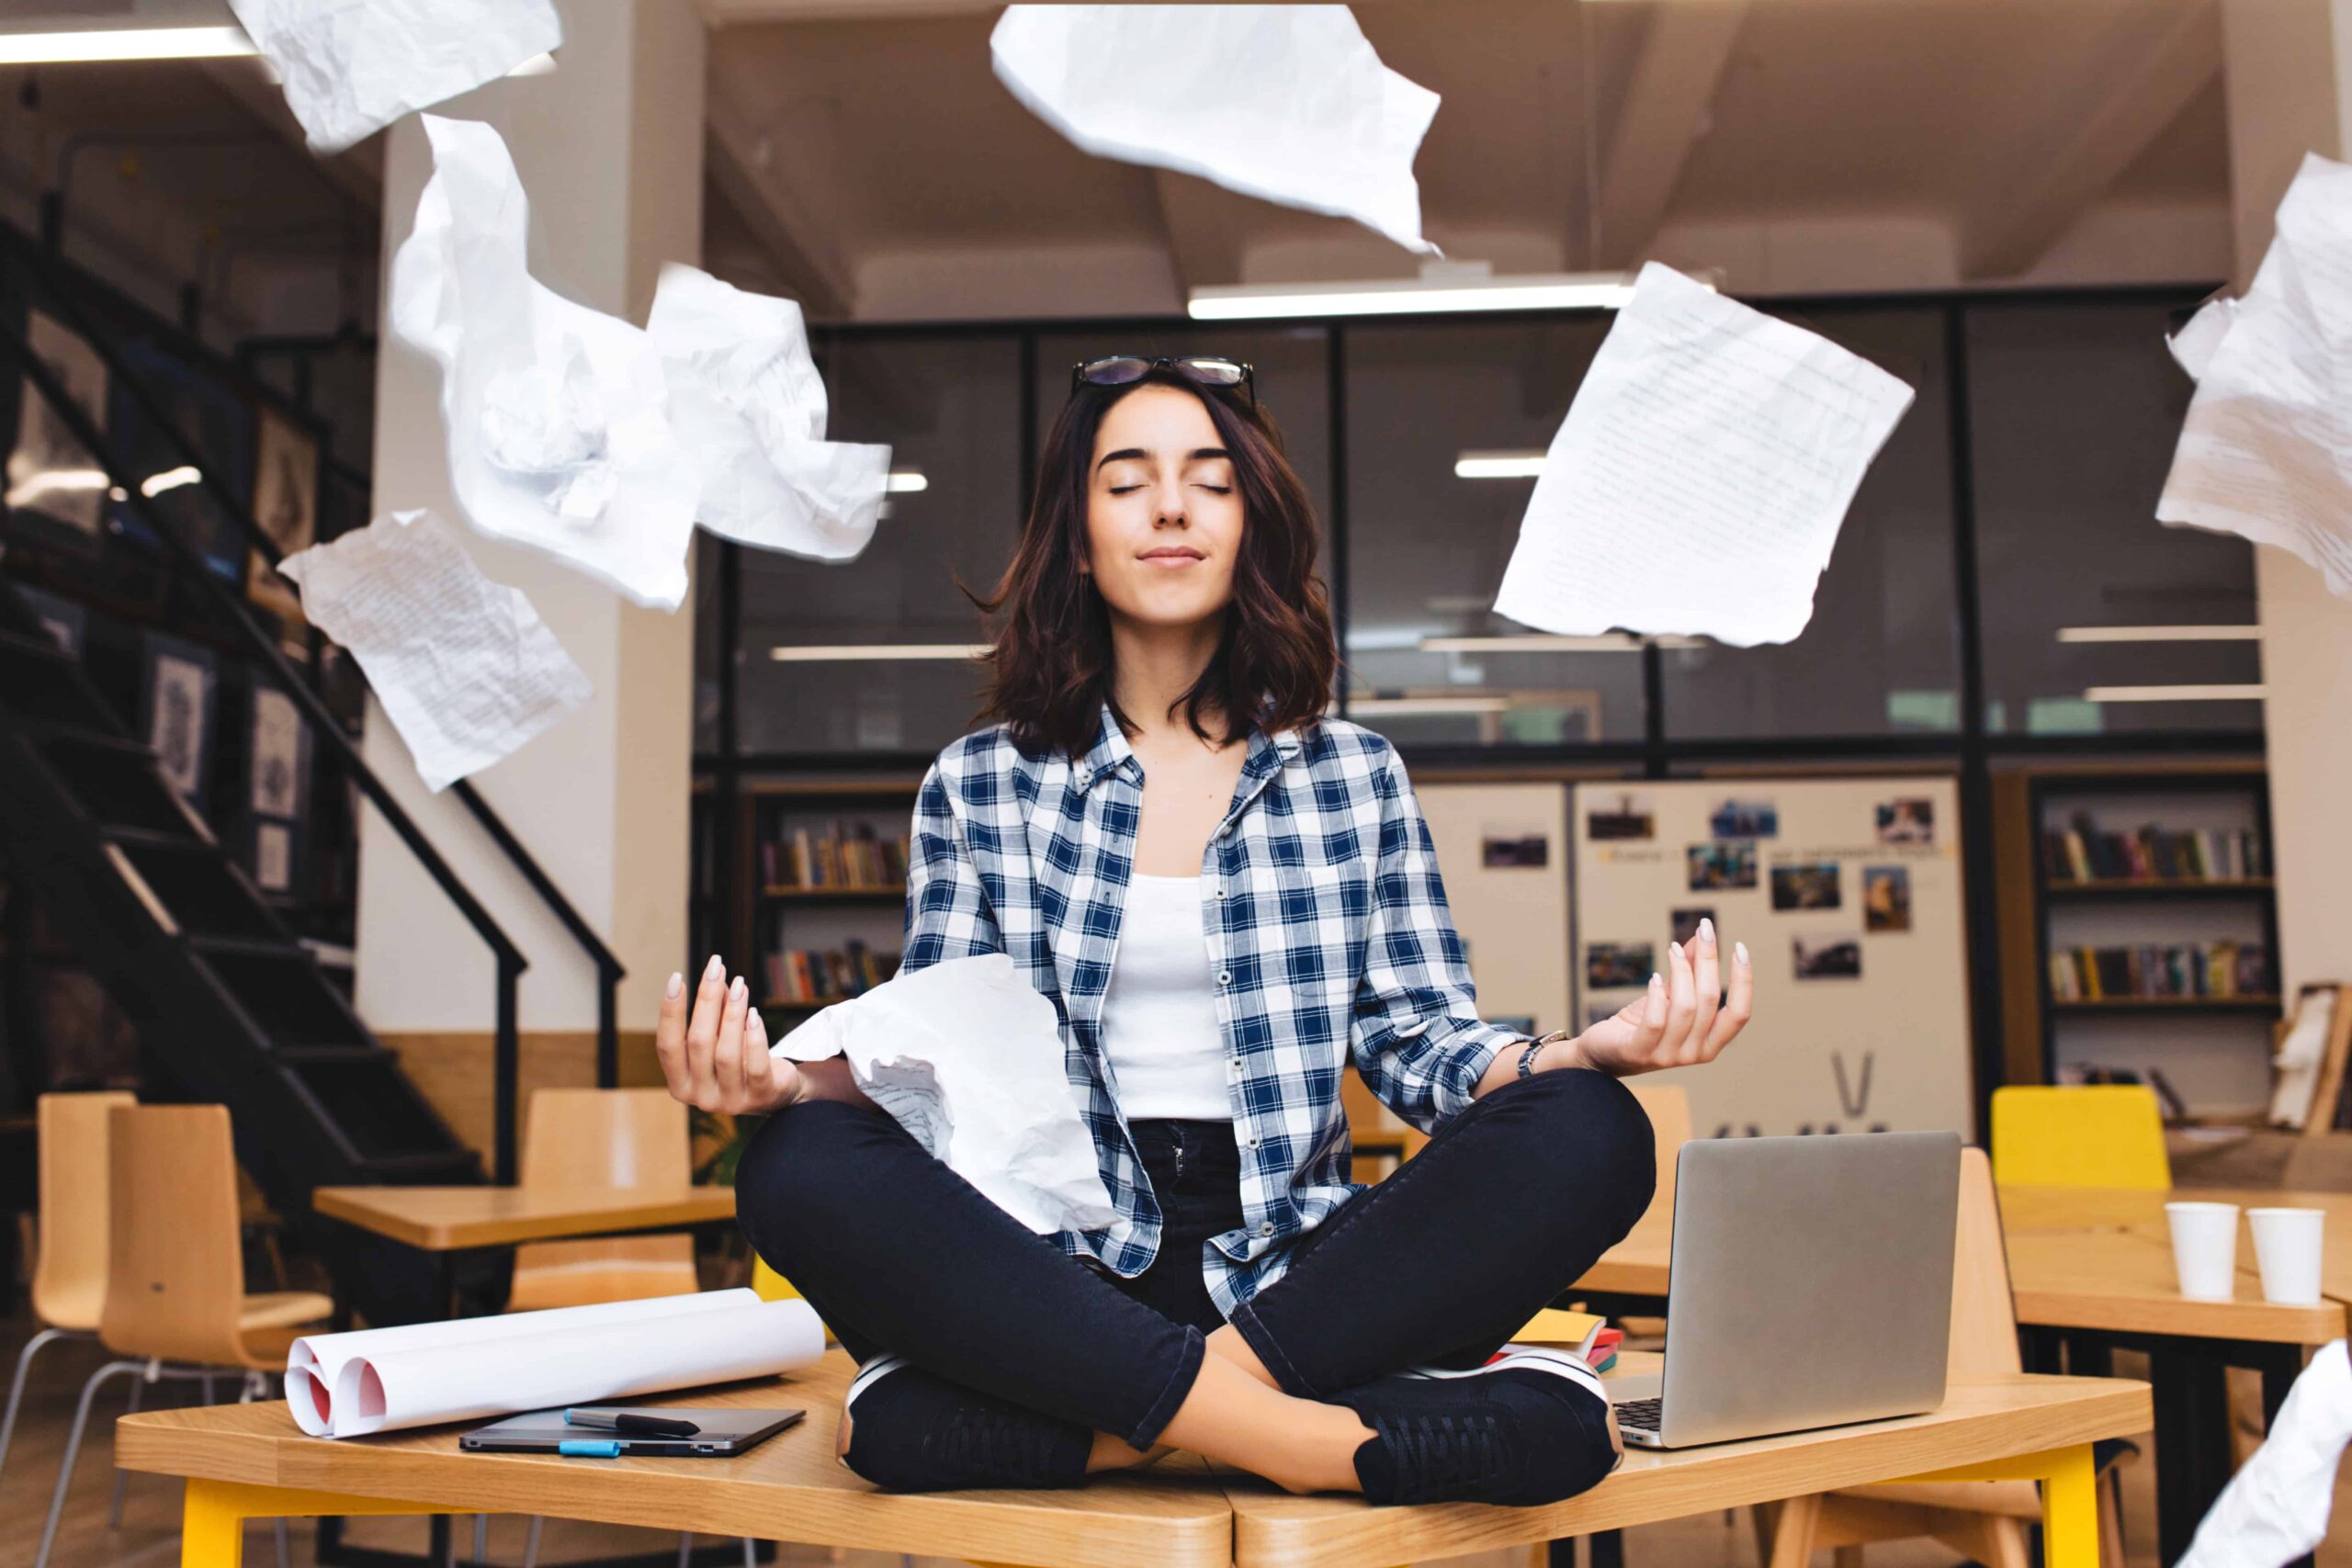 young pretty joyful brunette woman meditating on table surround work stuff and flying papers cheerful mood taking a break working studying relaxation true emotions scaled